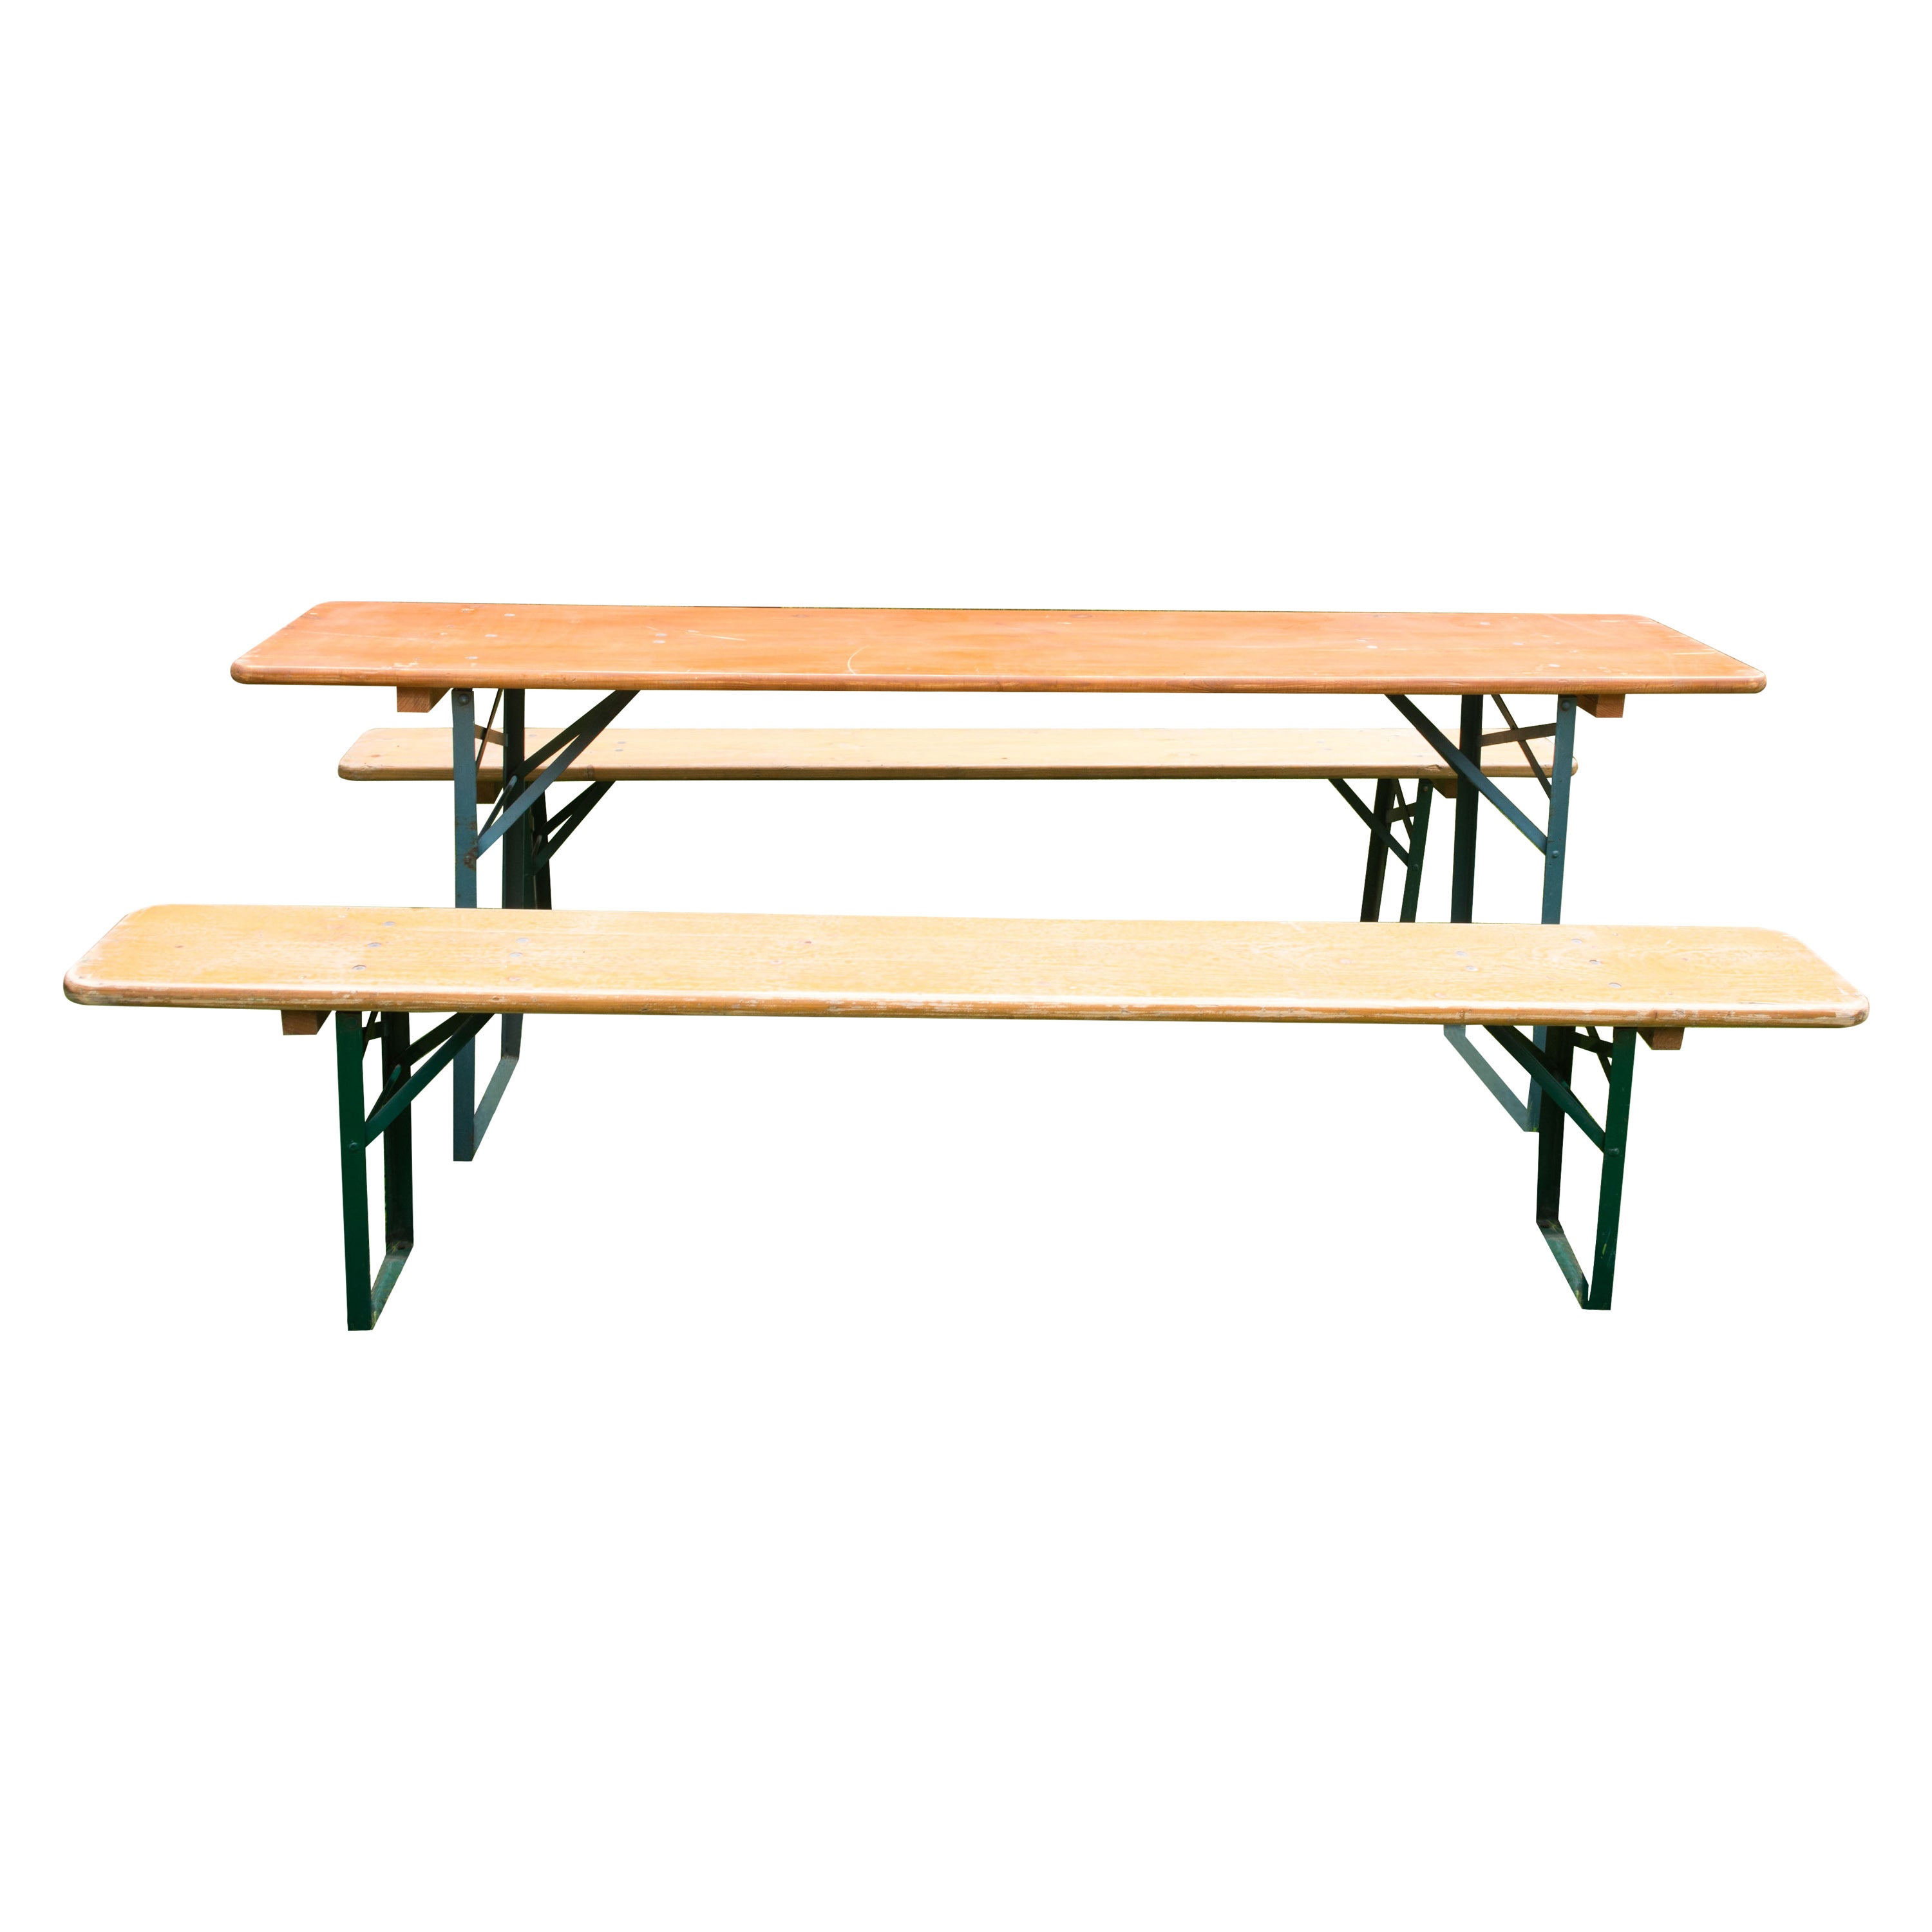 GARDEN TABLE BENCH HEAVY DUTY SWEDISH REDWOOD A-FRAME PUB STYLE PICNIC TABLE 